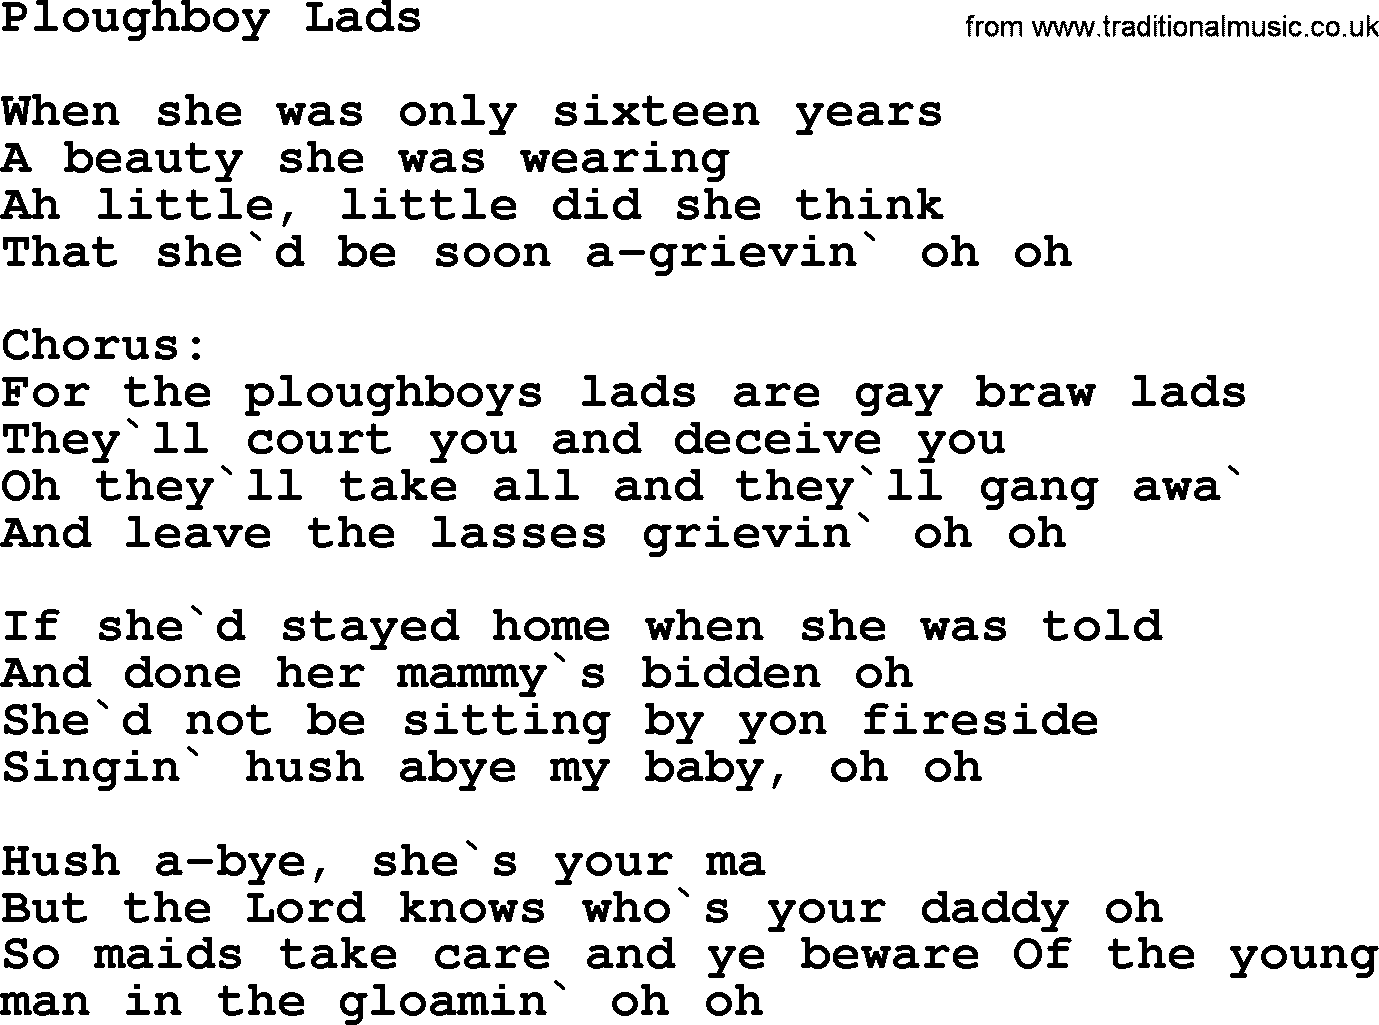 The Dubliners song: Ploughboy Lads, lyrics